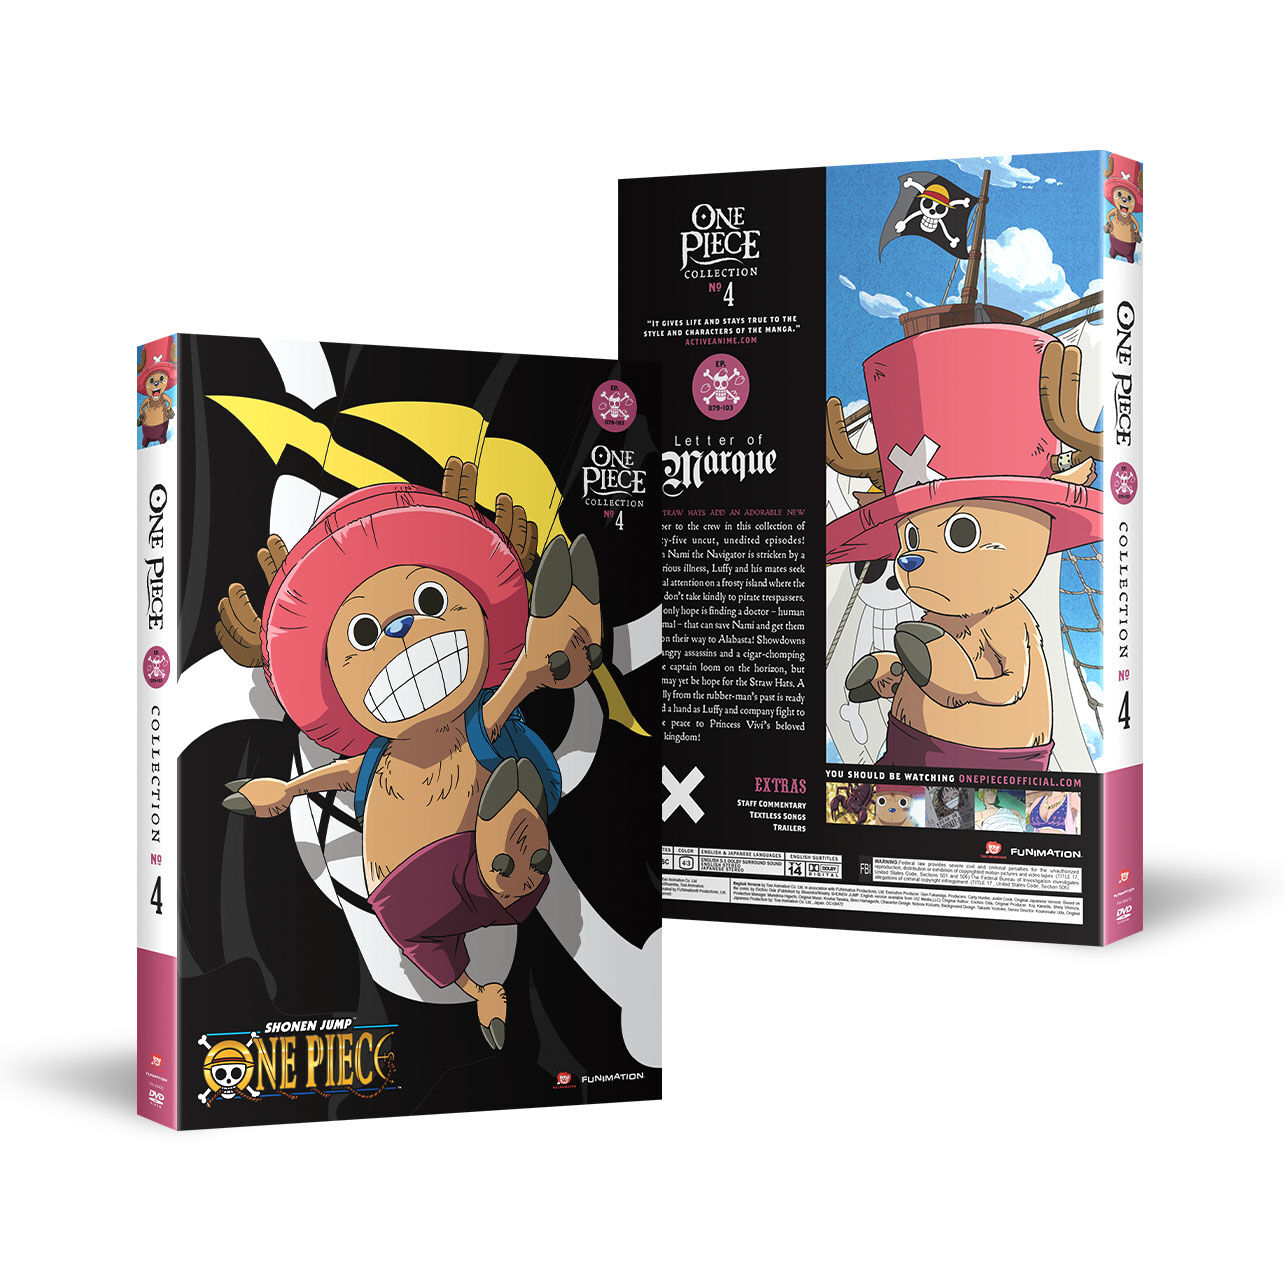 One Piece - Collection 4 - DVD | Crunchyroll Store